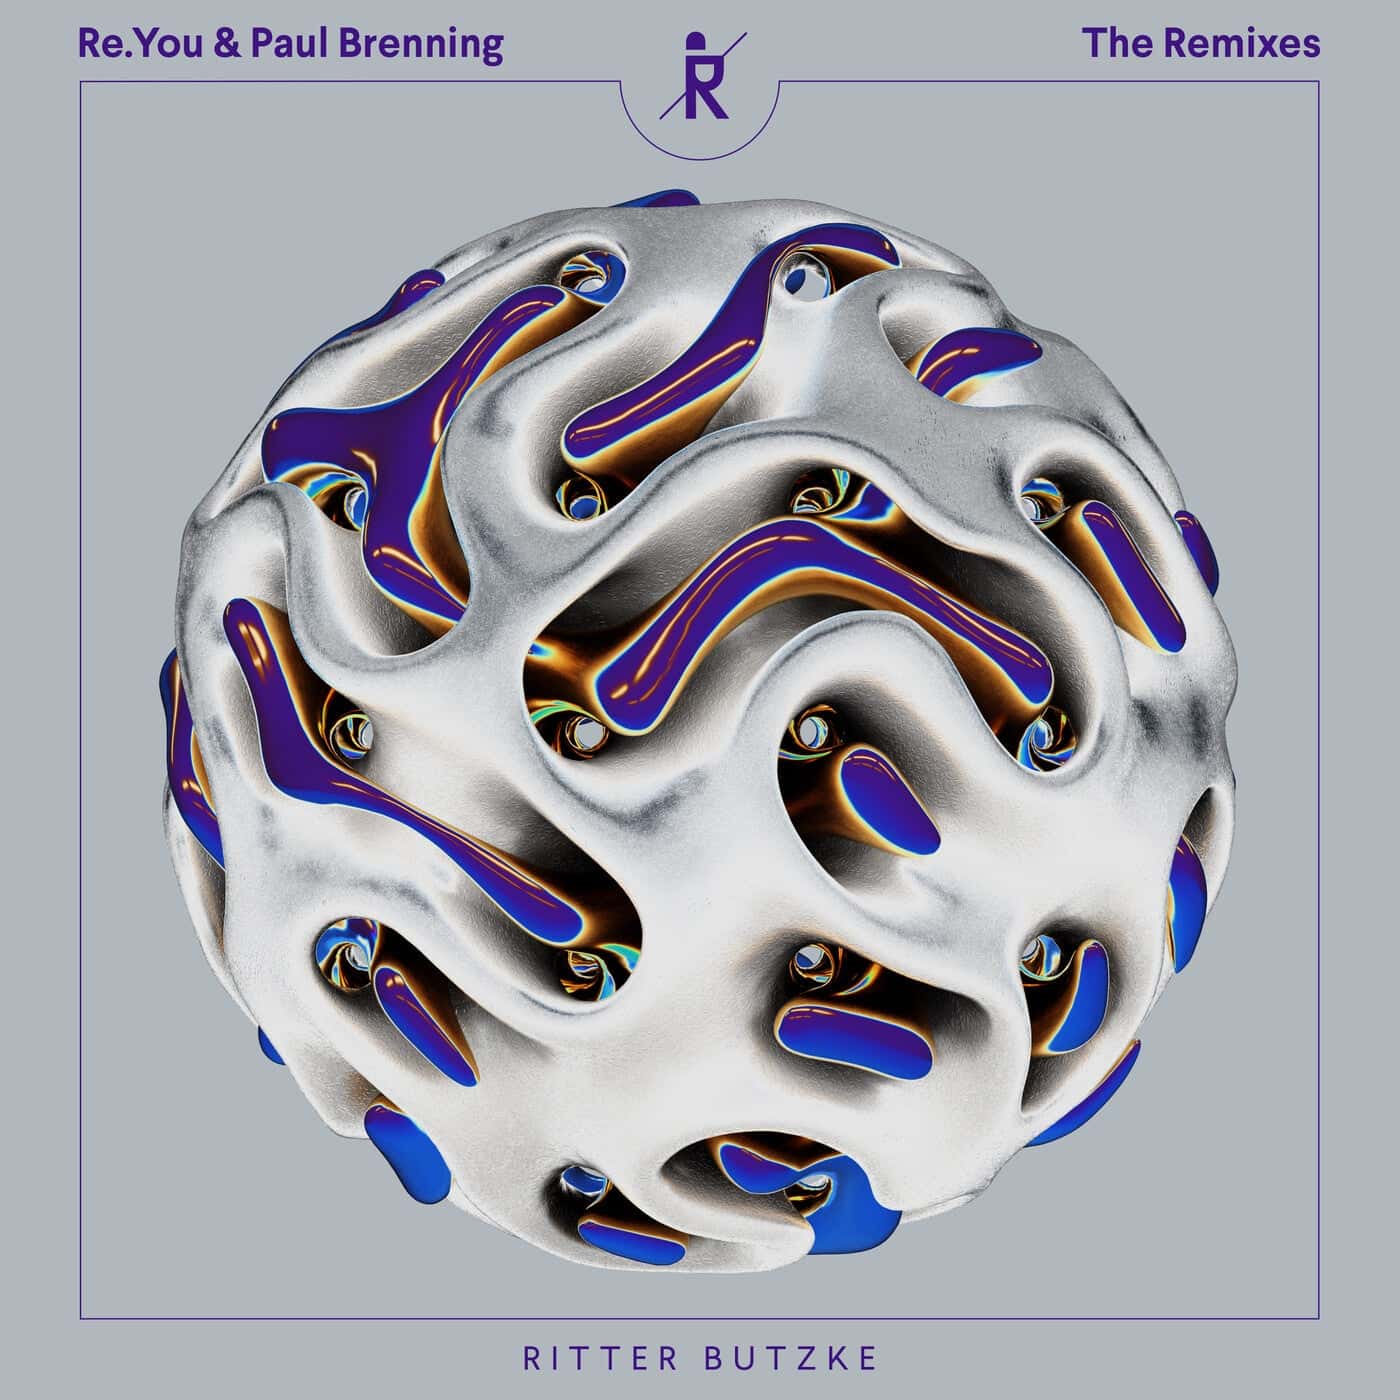 image cover: Re.you, Paul Brenning - Reasons To Love Remixes / RBR236